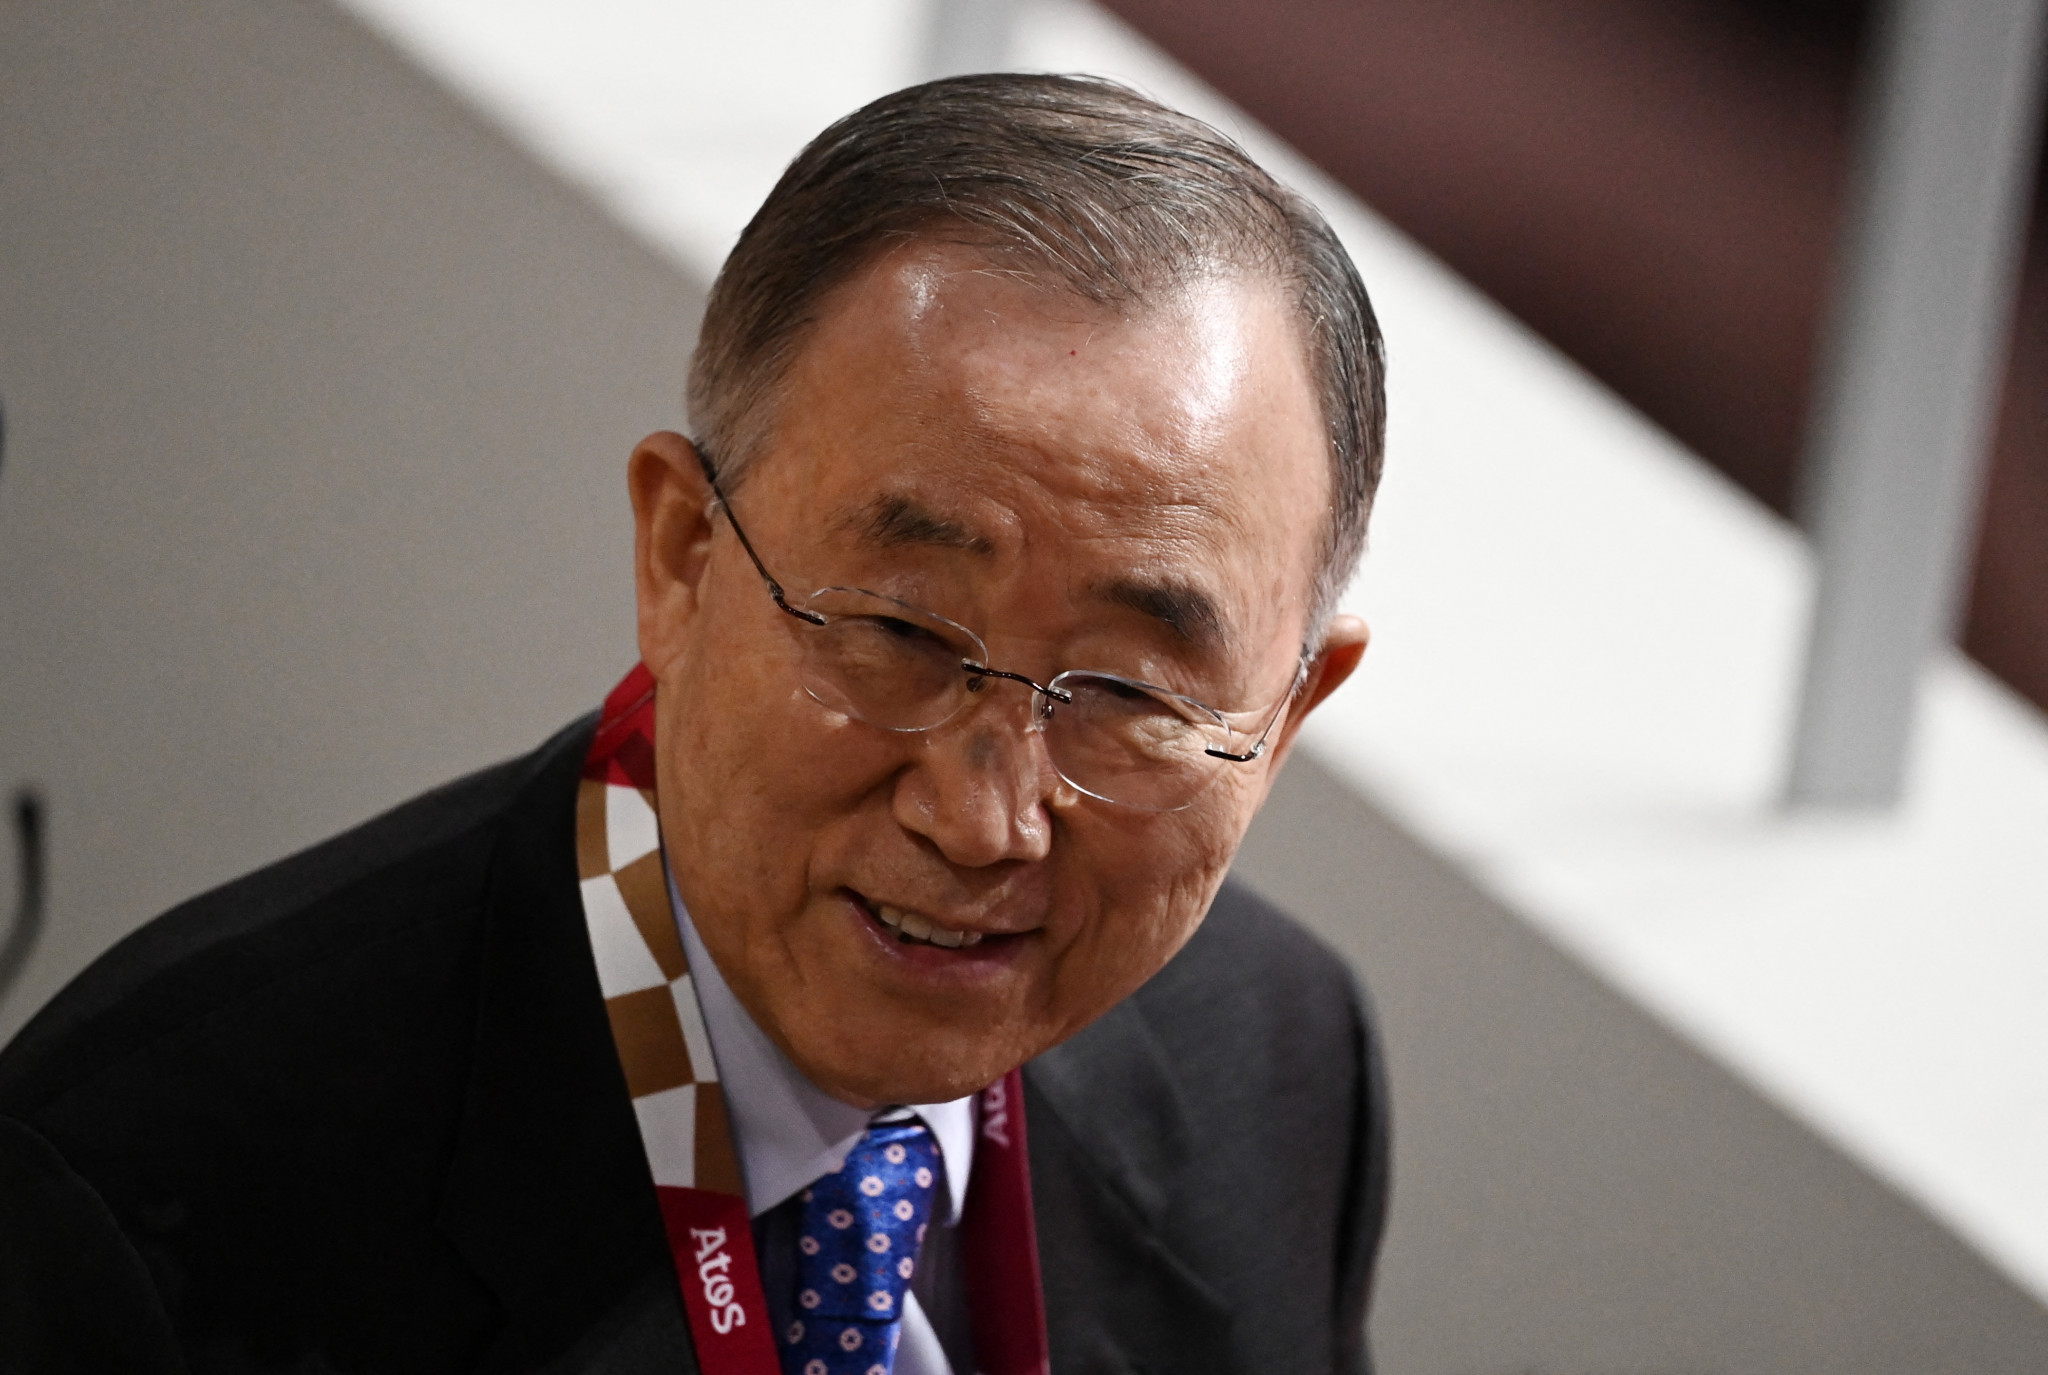 Former UN secretary general Ban Ki-moon will be among the guests at the festival ©Getty Images